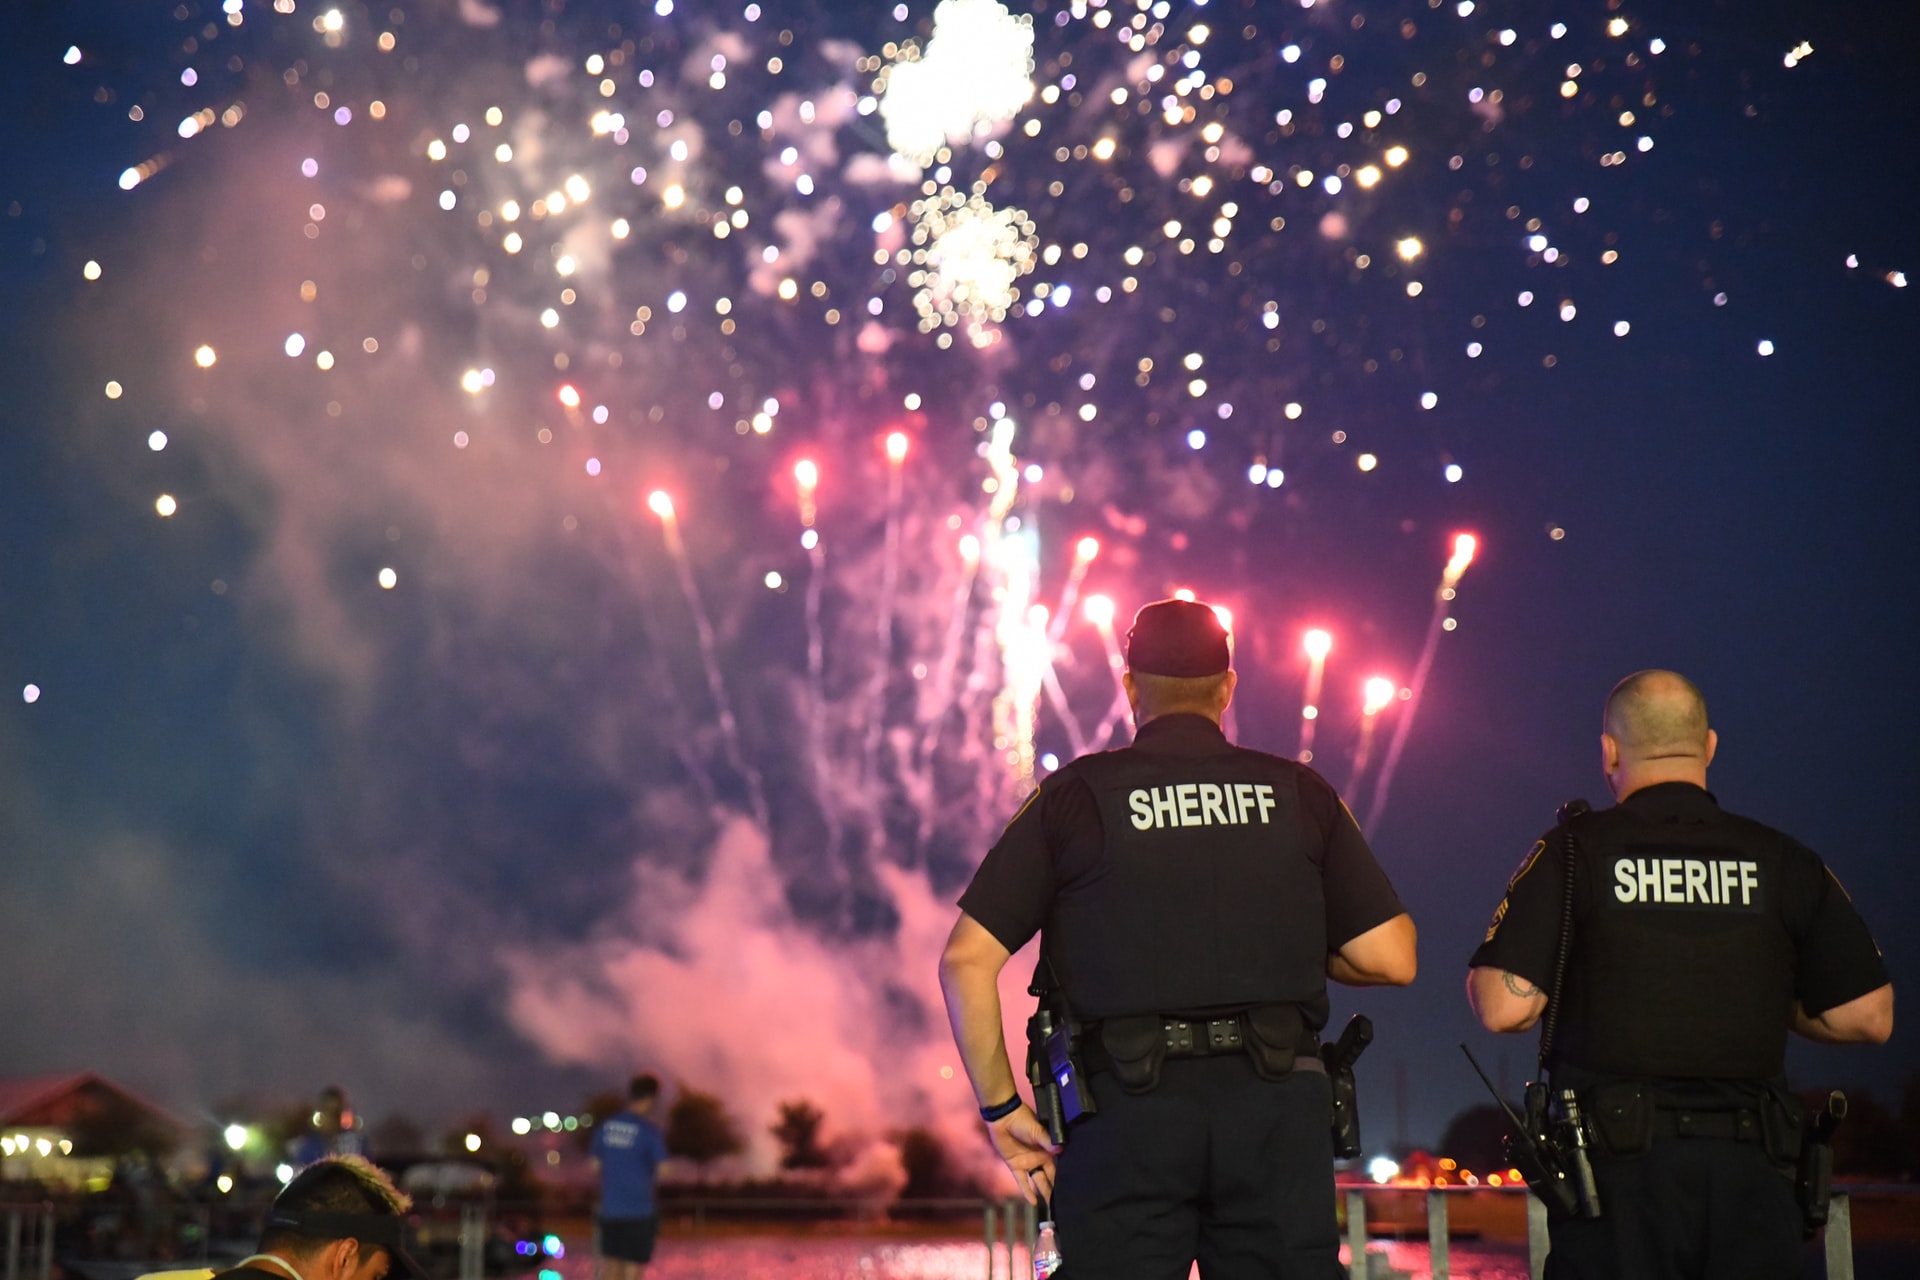 two sheriffs stand facing towards fireworks over a lake